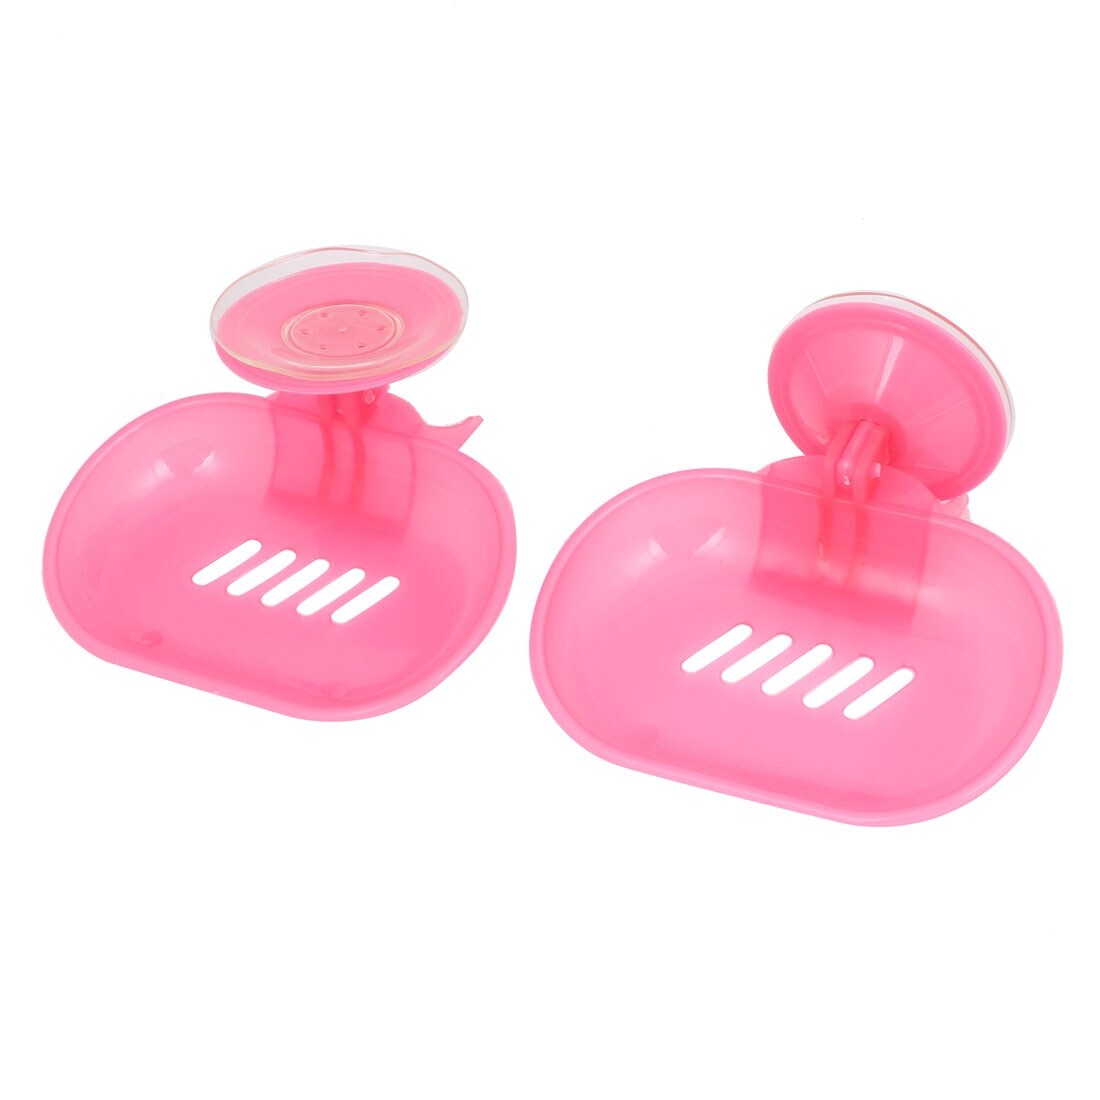 https://ak1.ostkcdn.com/images/products/is/images/direct/238bad742624af5e8c6b1e31b66dfa1f8441e5cd/Wall-Bathroom-Hollow-Out-Suction-Cup-Soap-Dish-Tray-Holder-Pink-2-Pcs.jpg